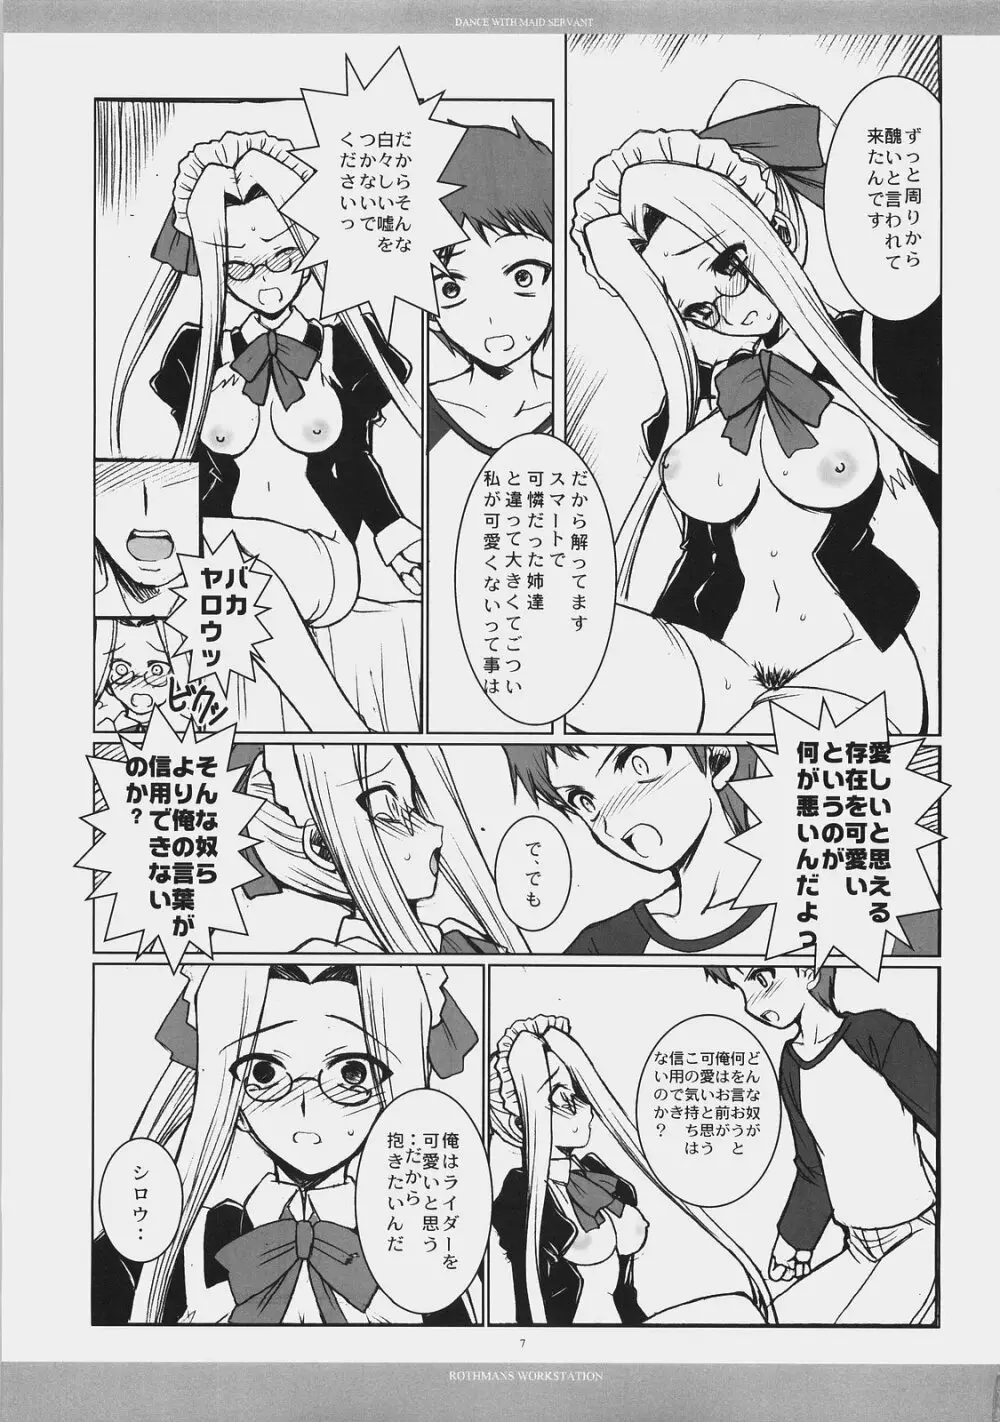 Dance with Maid Servant Page.6